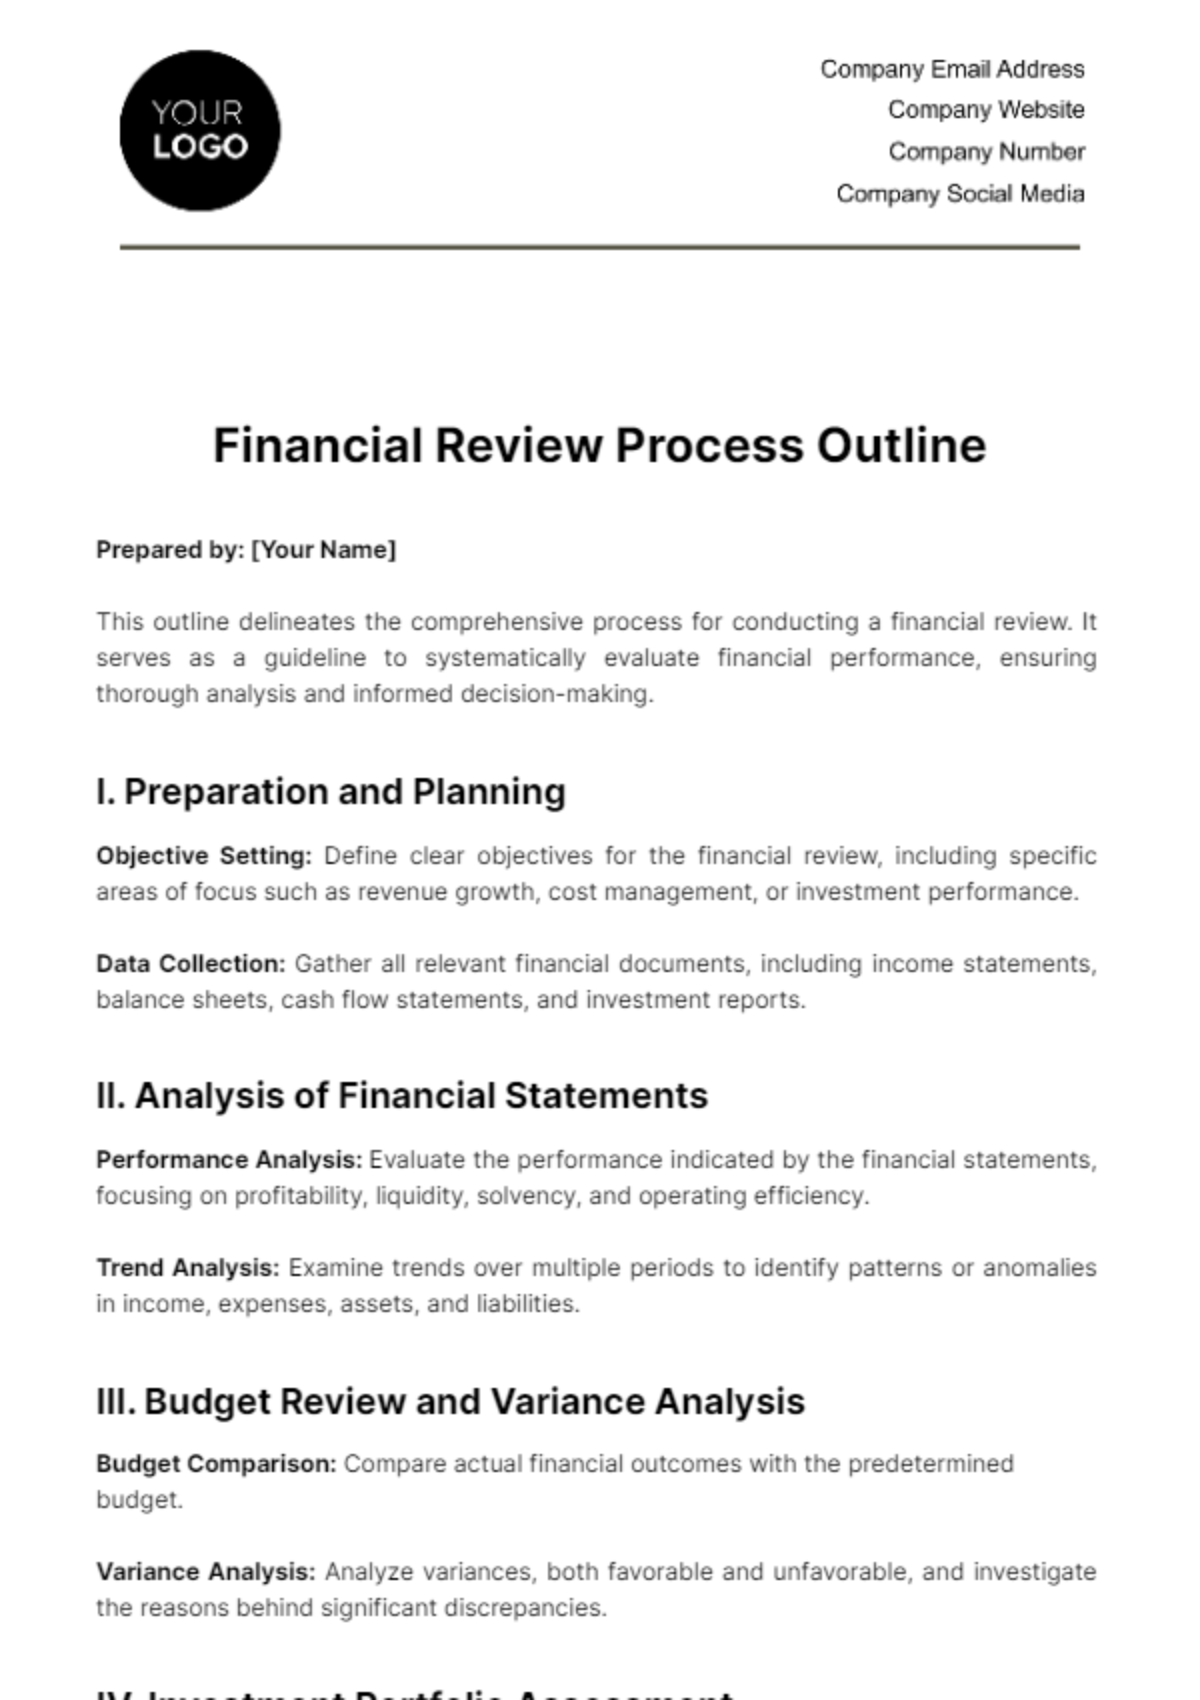 Free Financial Review Process Outline Template